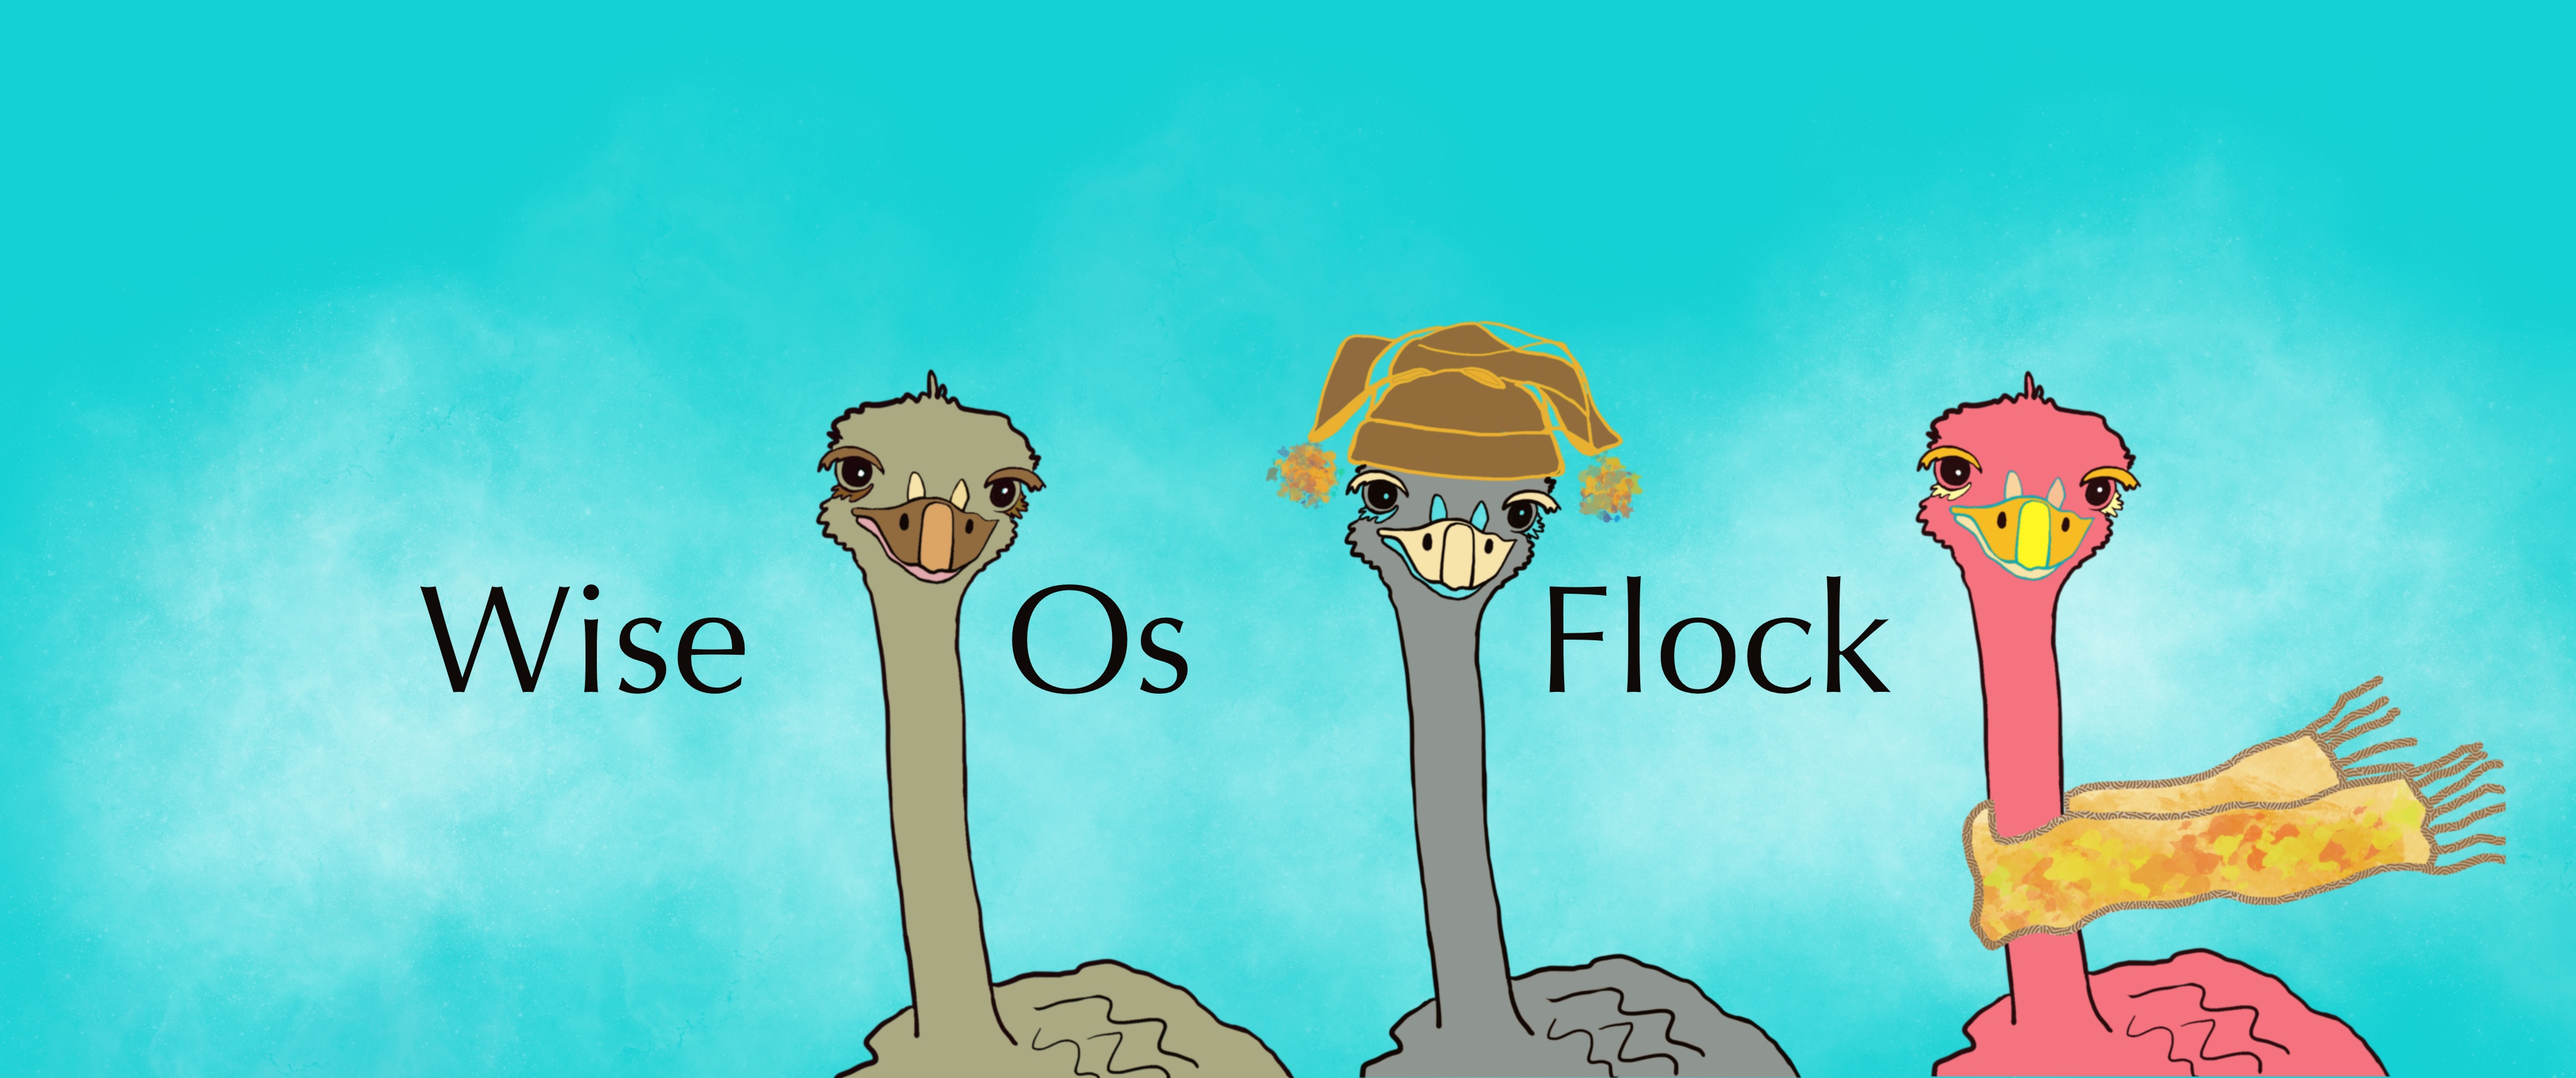 Wise Os Flock